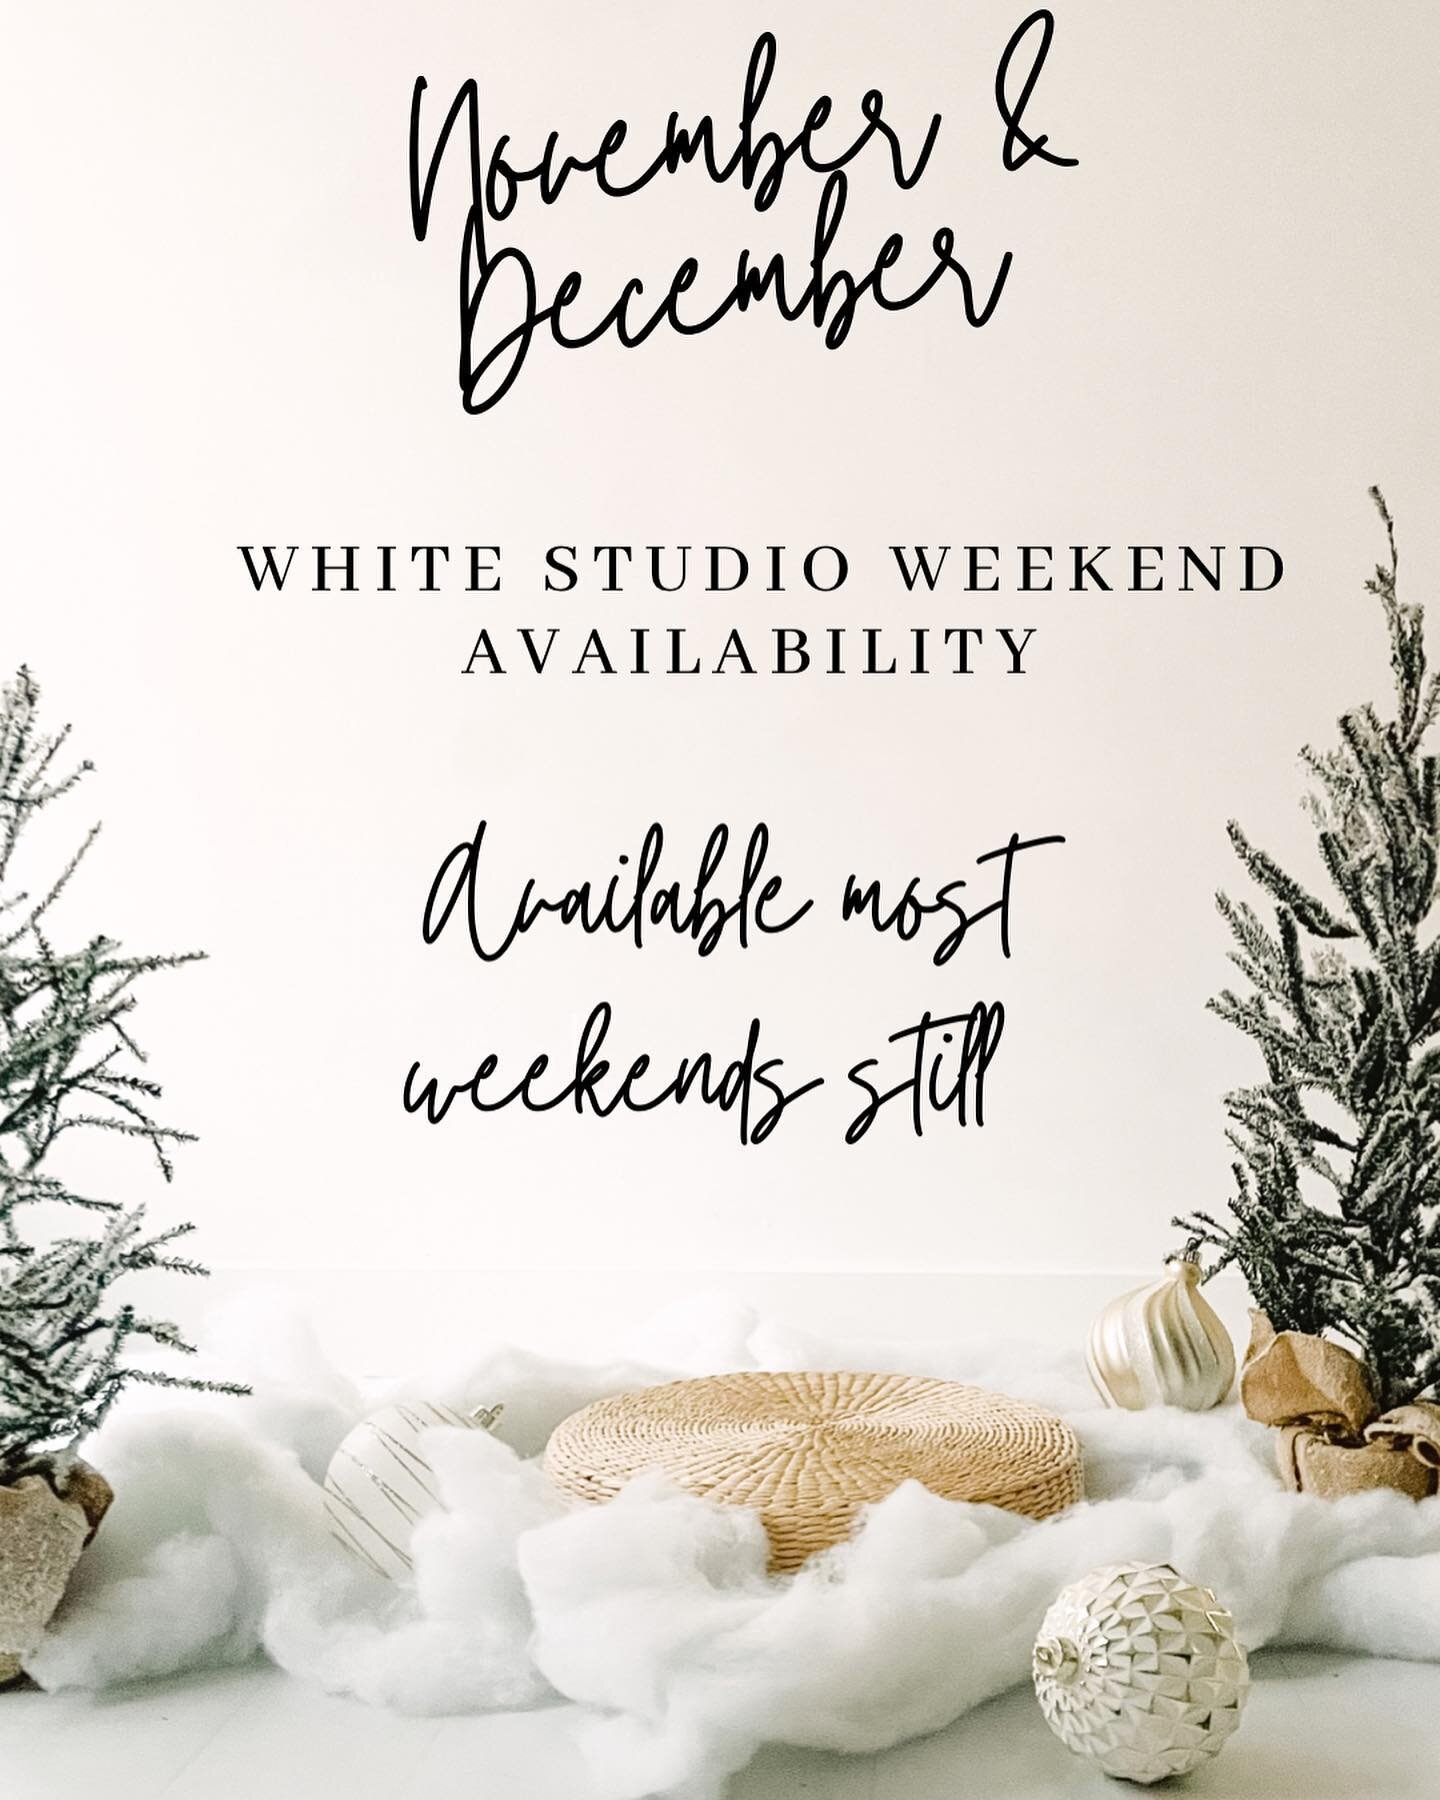 Our white studio is perfect for your smaller family clients of 2-5 or for kids mini sessions!
Props include:
🌲3, 3&rsquo; trees
🌲5 oversized (shatterproof) ornaments
🌲white lights
🌲fake snow
🌲an assortment of chairs, benches and stools for seati